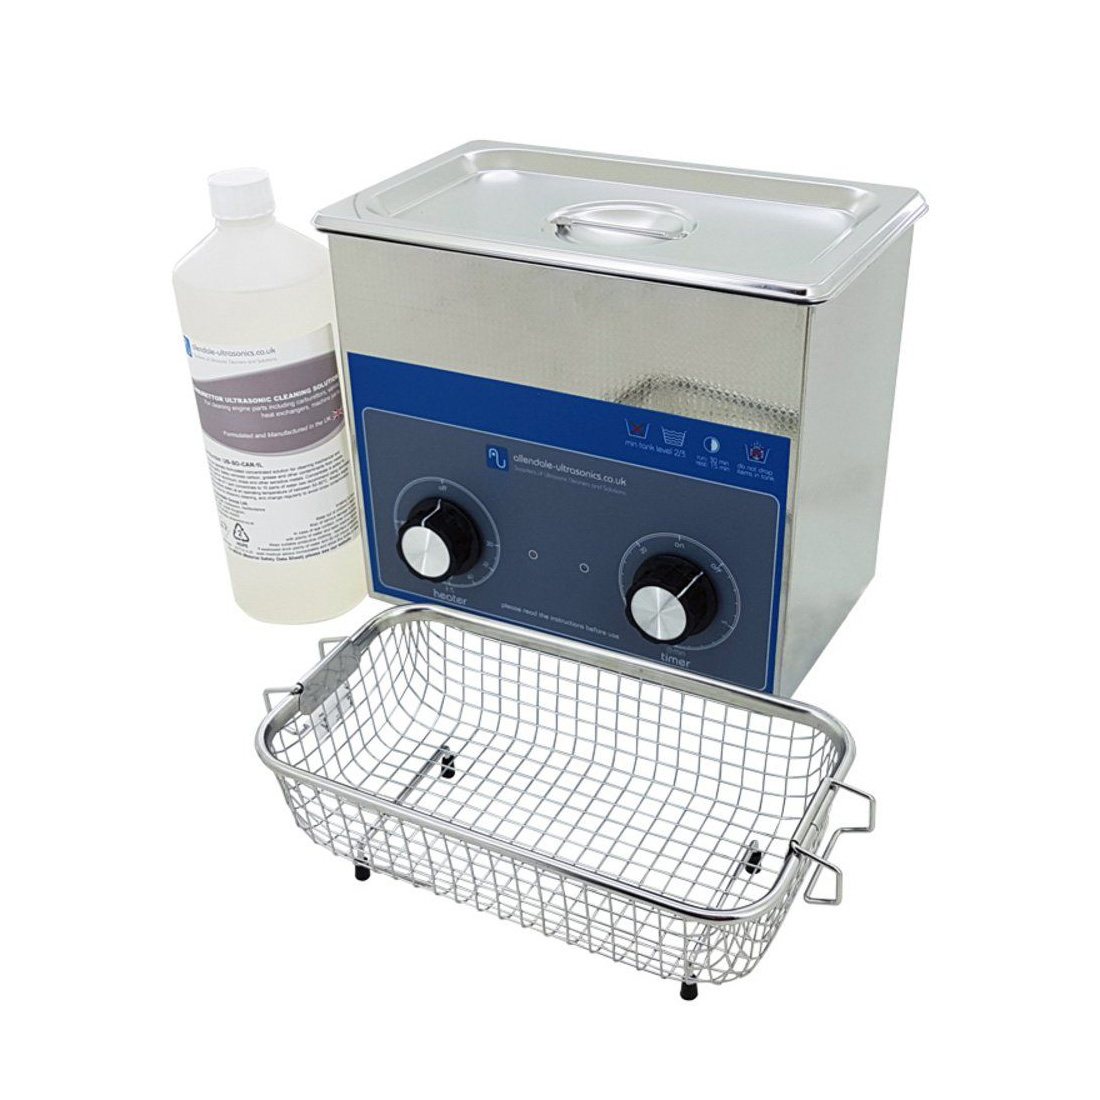 TY175 Ultrasonic Cleaner & Carb Cleaning Fluid Kit - 3 Litre - Allendale Ultrasonics